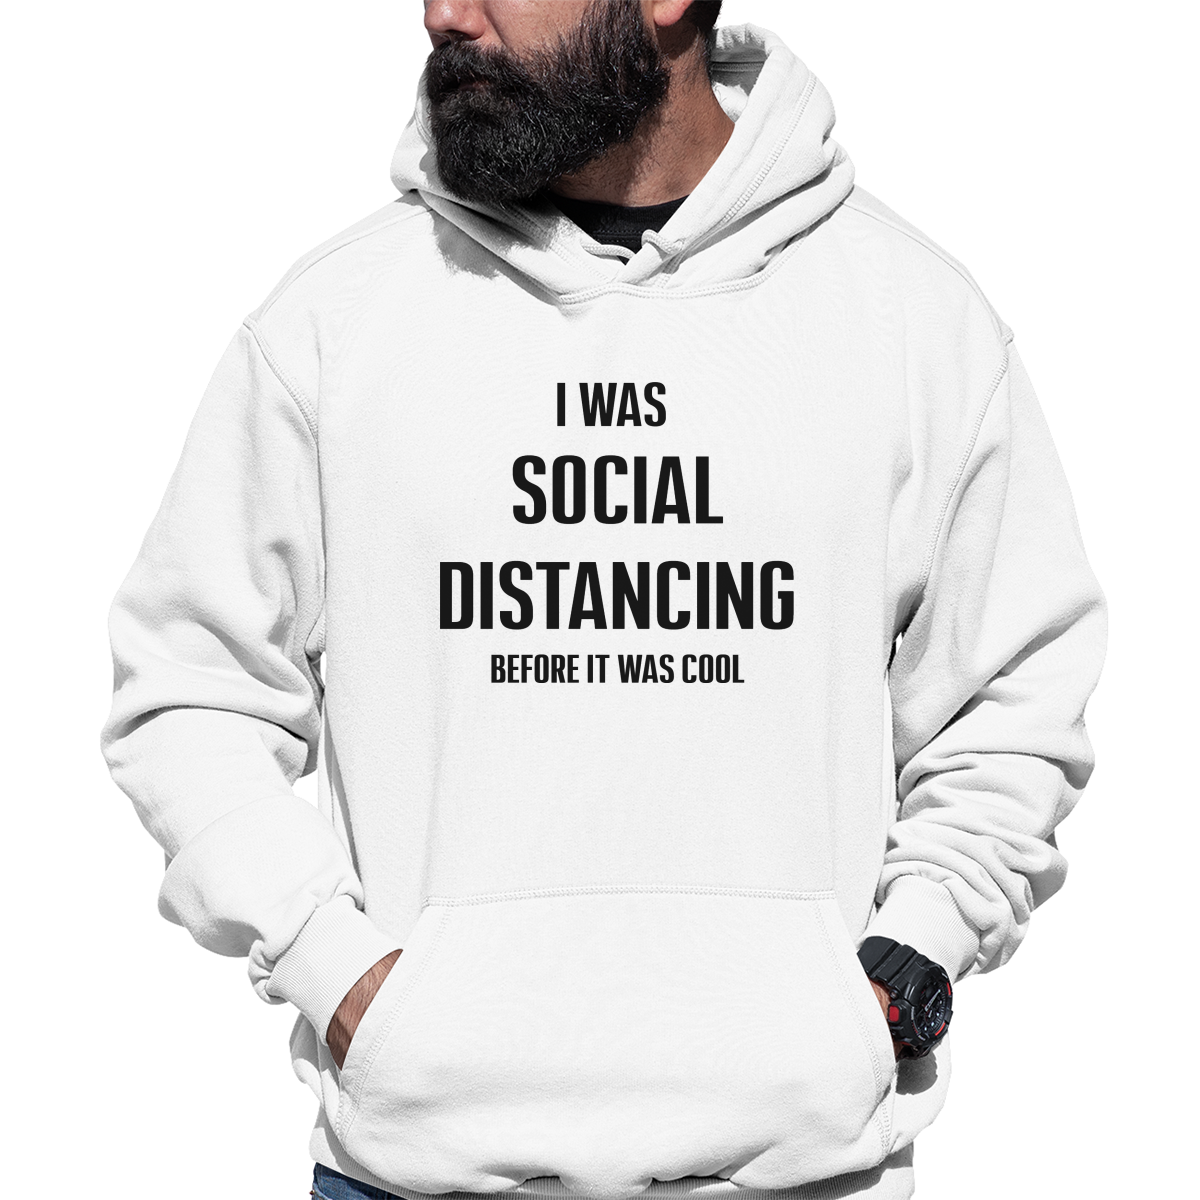 I was social distancing before it was cool Unisex Hoodie | White